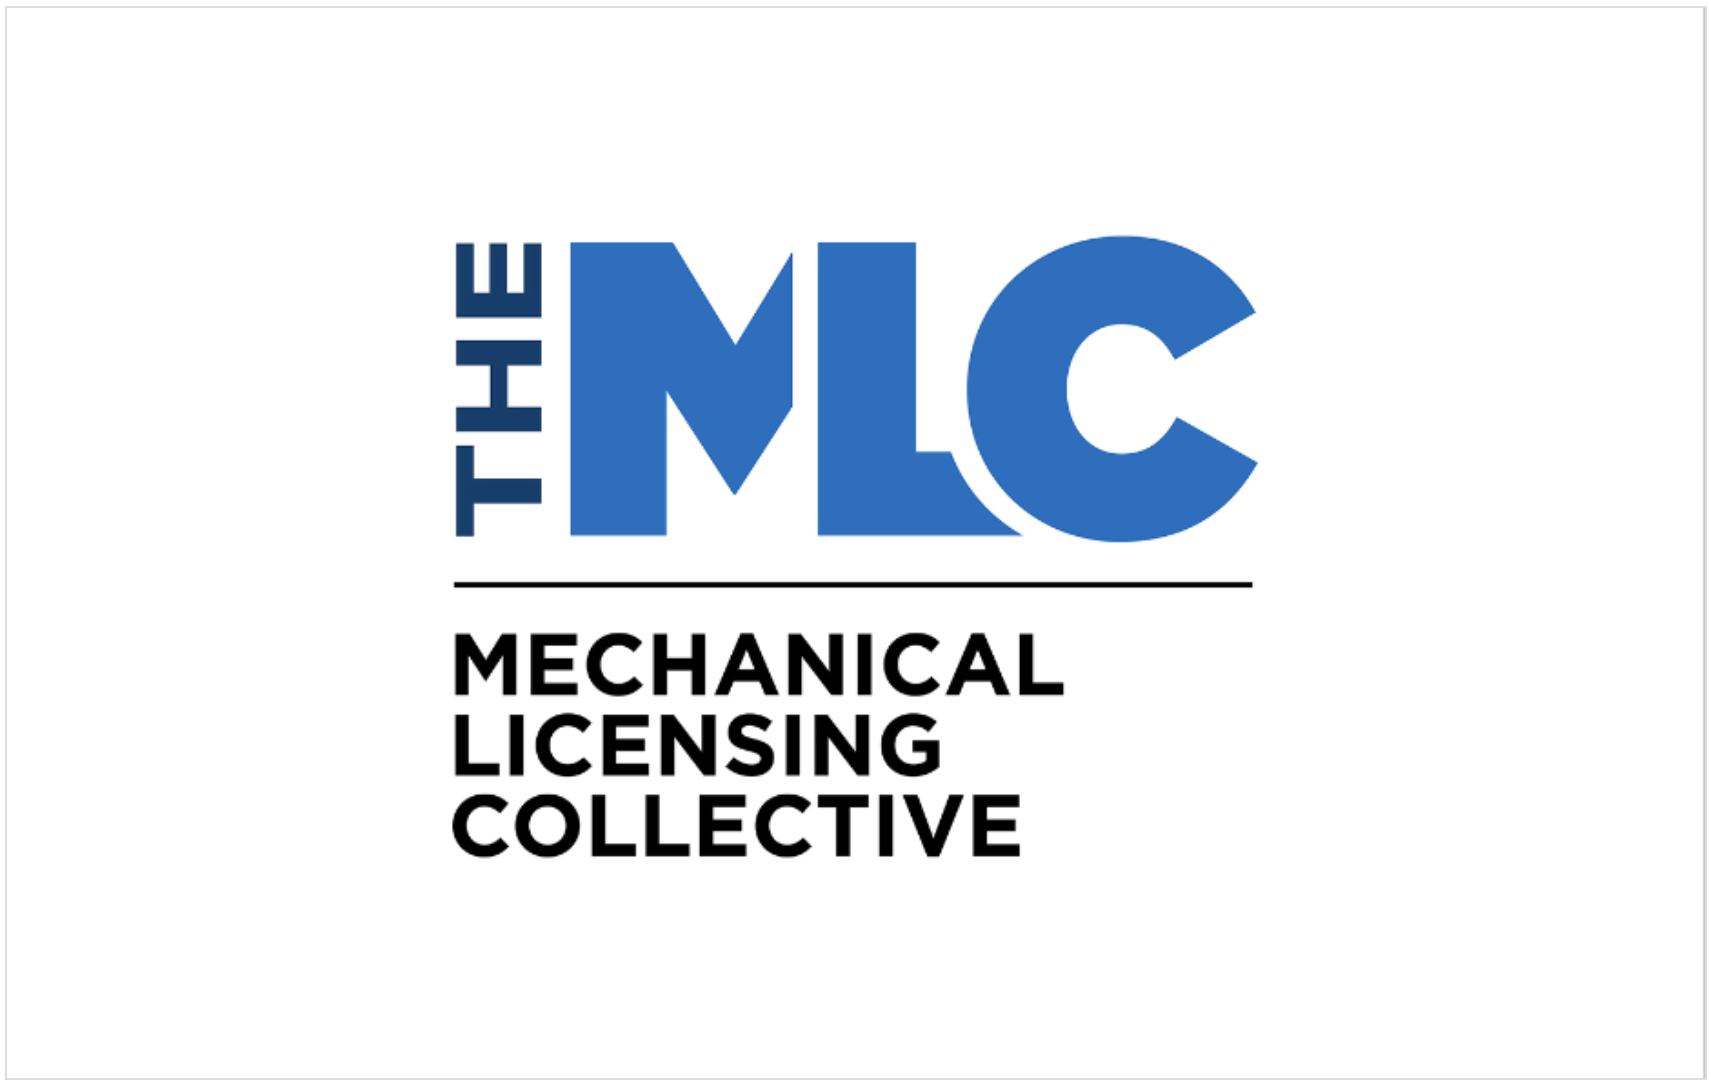 the mechanical licensing collective